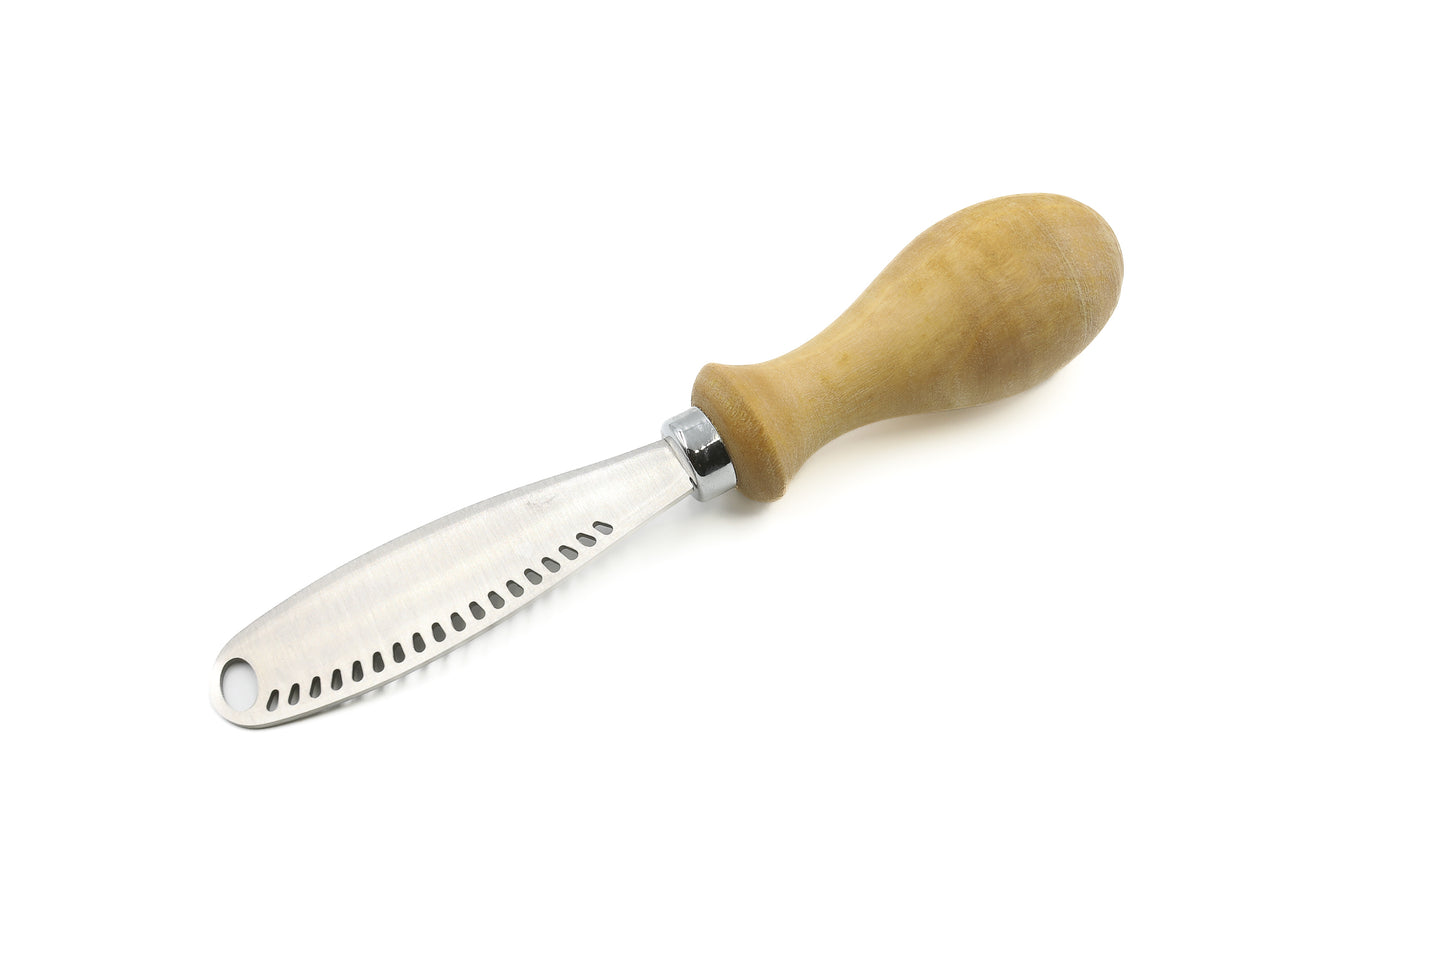 Nature's Finest: Olive Wood Cheese Knives for Gourmet Delights